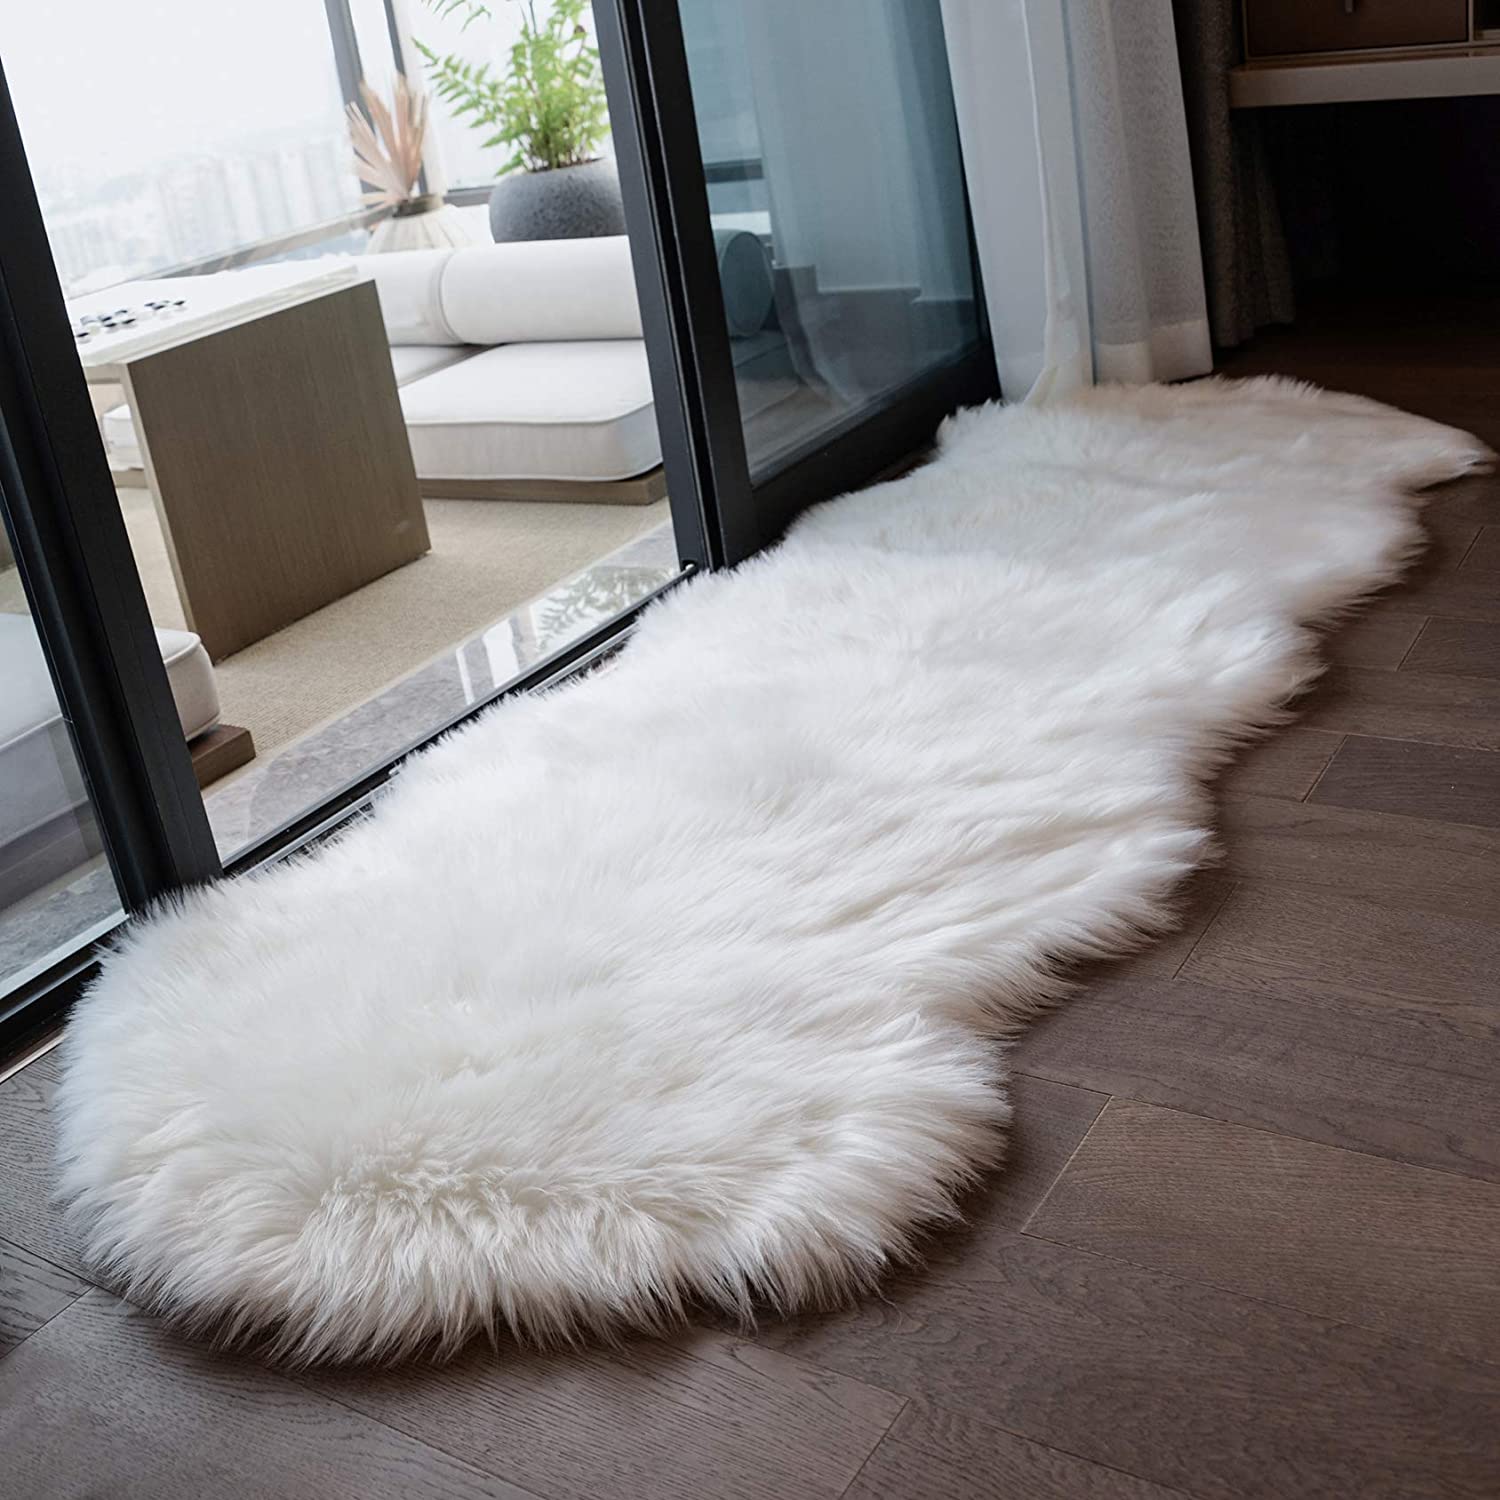 Coumore Ultra Soft Faux Sheepskin Fur Rug White Fluffy Area Rug